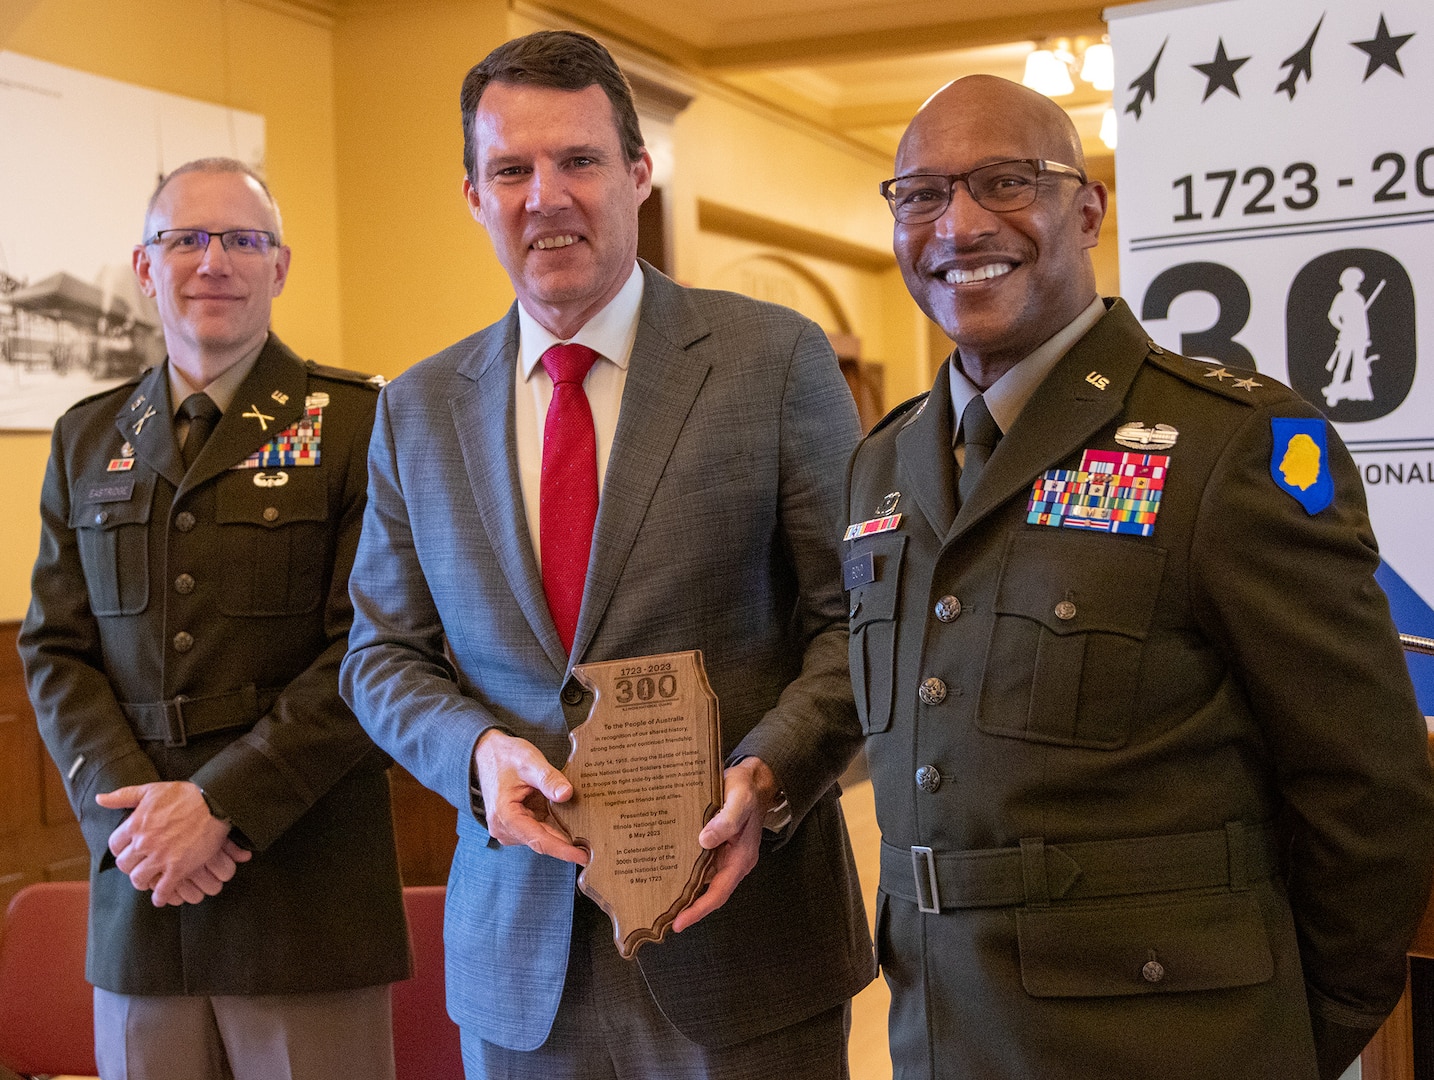 Maj. Gen. Rodney Boyd, Assistant Adjutant General – Army and Commander of the Illinois Army National Guard, and Col. Michael Eastridge, former commander of the 33rd Infantry Brigade Combat Team, present Chris Elstoft, Consul General of Australia in Chicago, with a plaque honoring the shared history between the Illinois National Guard and Australia.